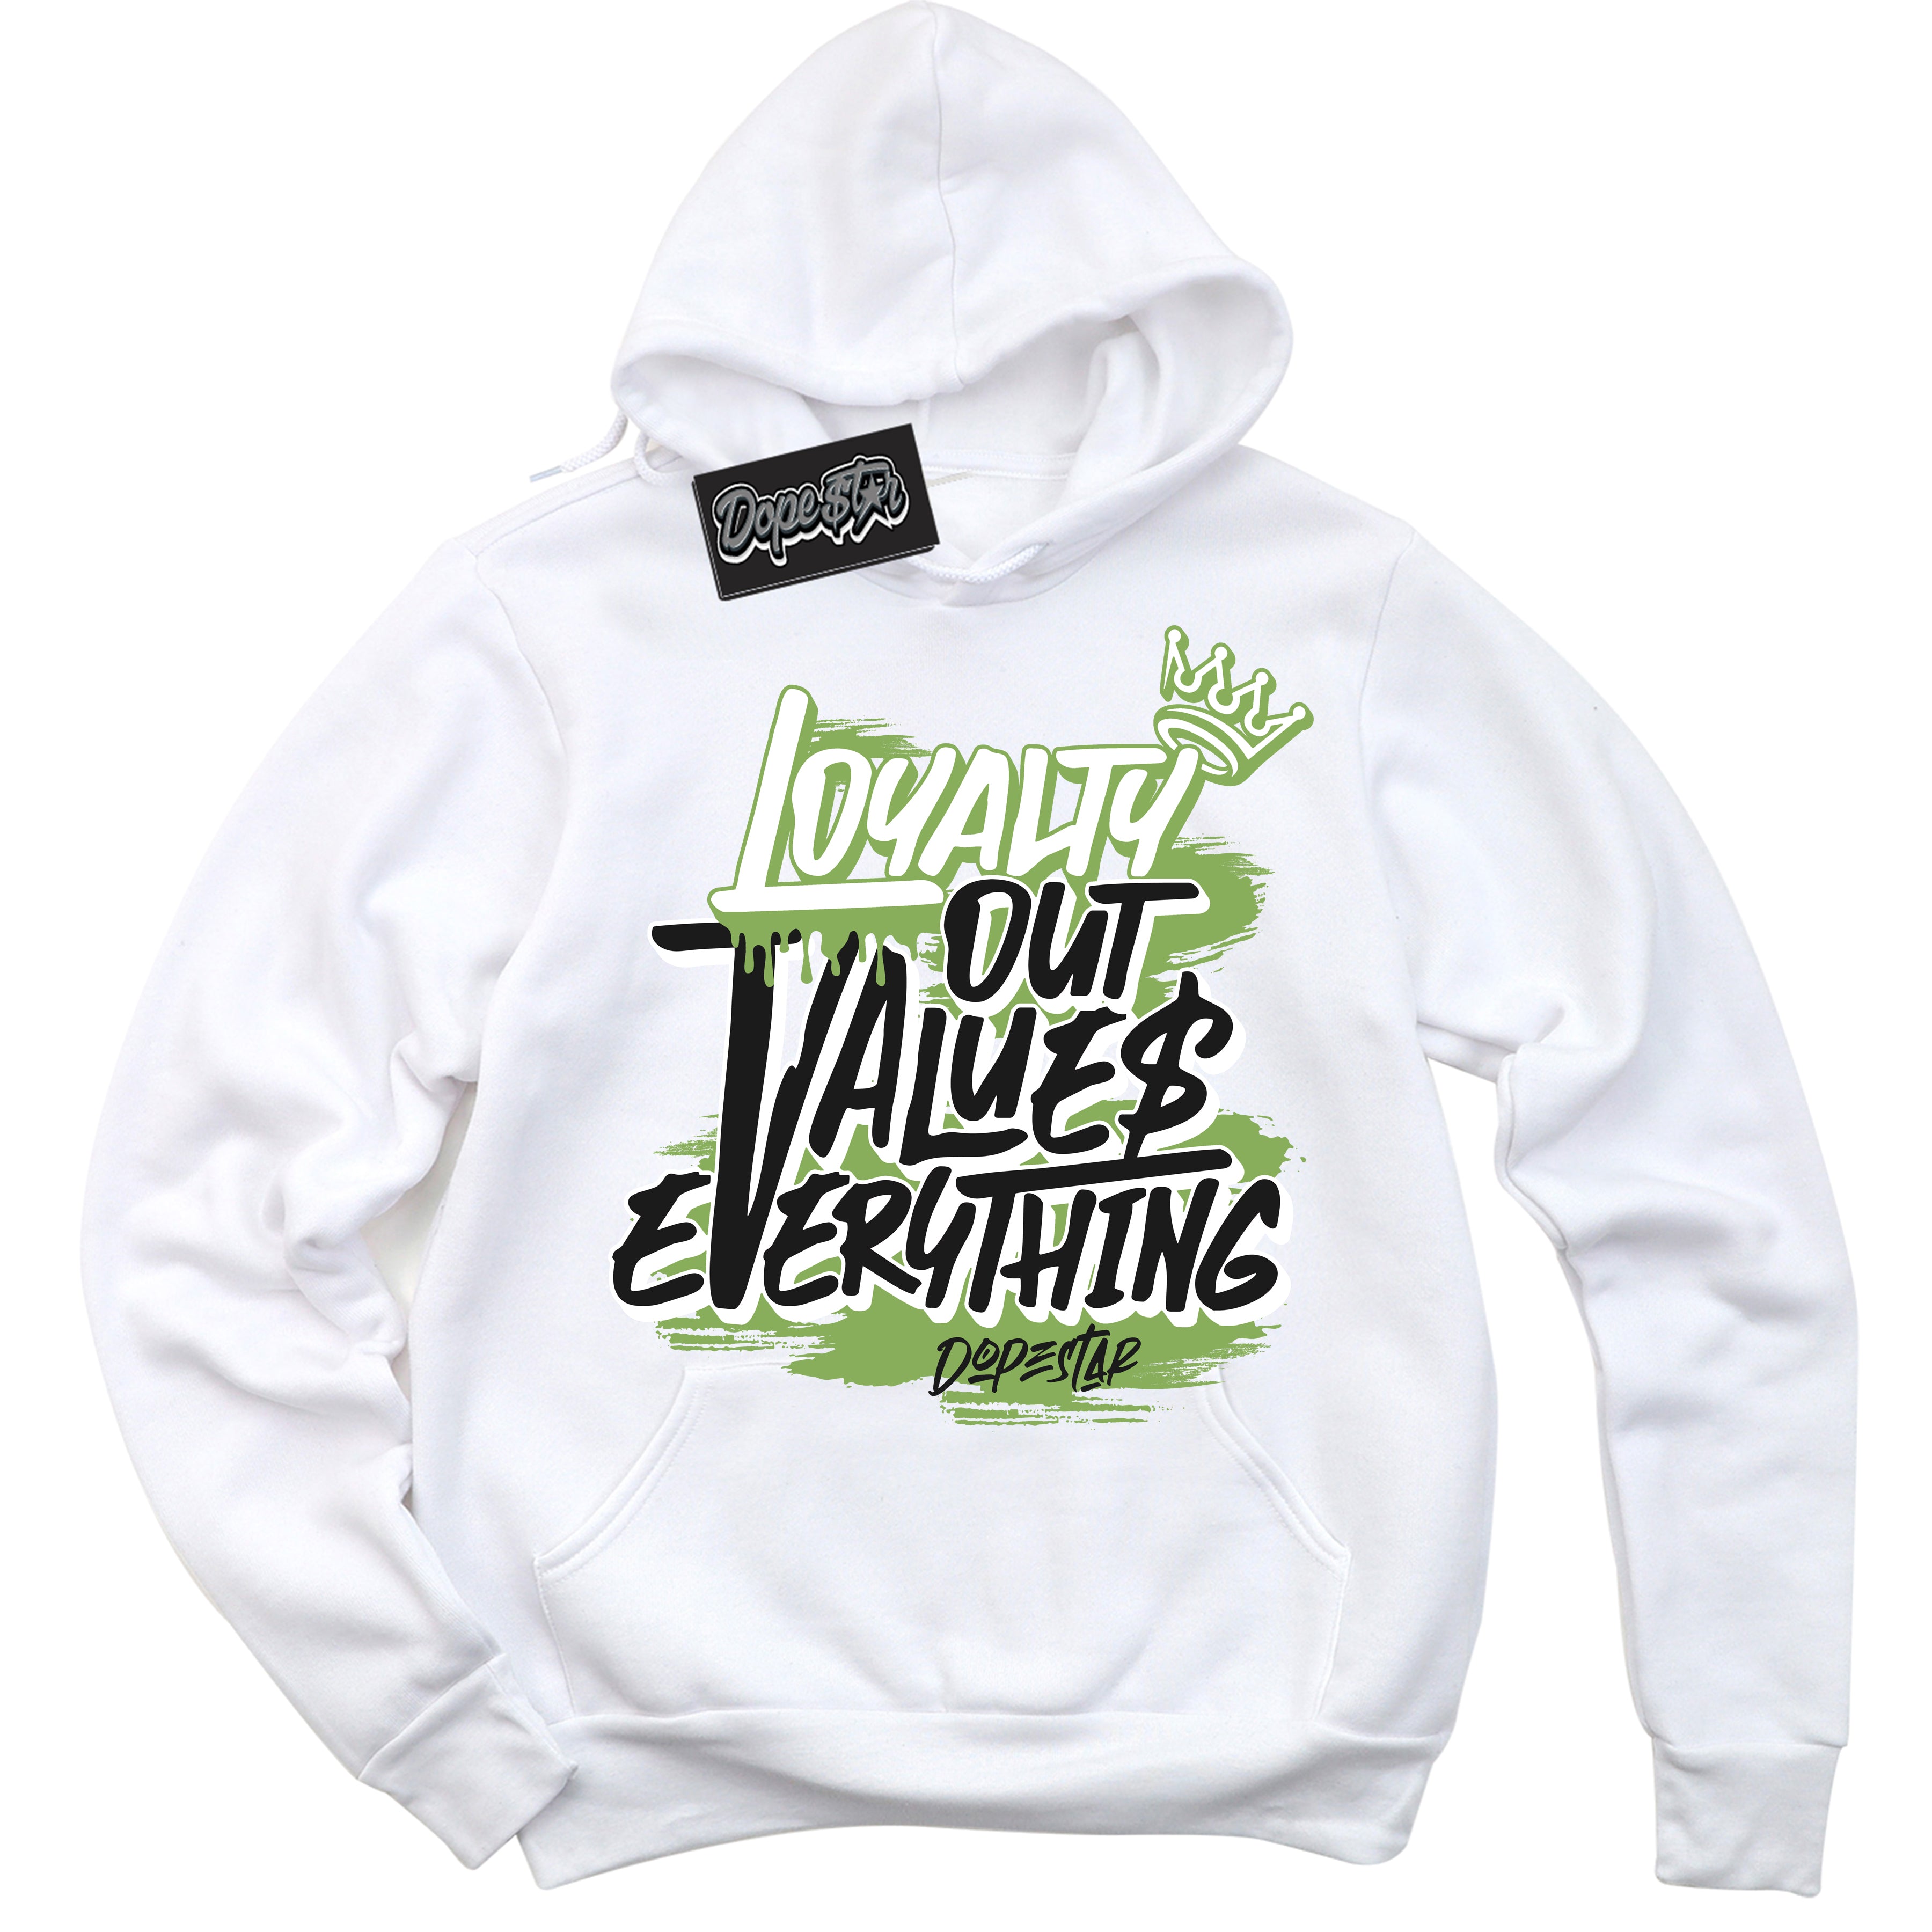 Cool White Hoodie with “ Loyalty Out Values Everything ”  design that Perfectly Matches Pro x Powerpuff Girls Buttercup Sneakers.